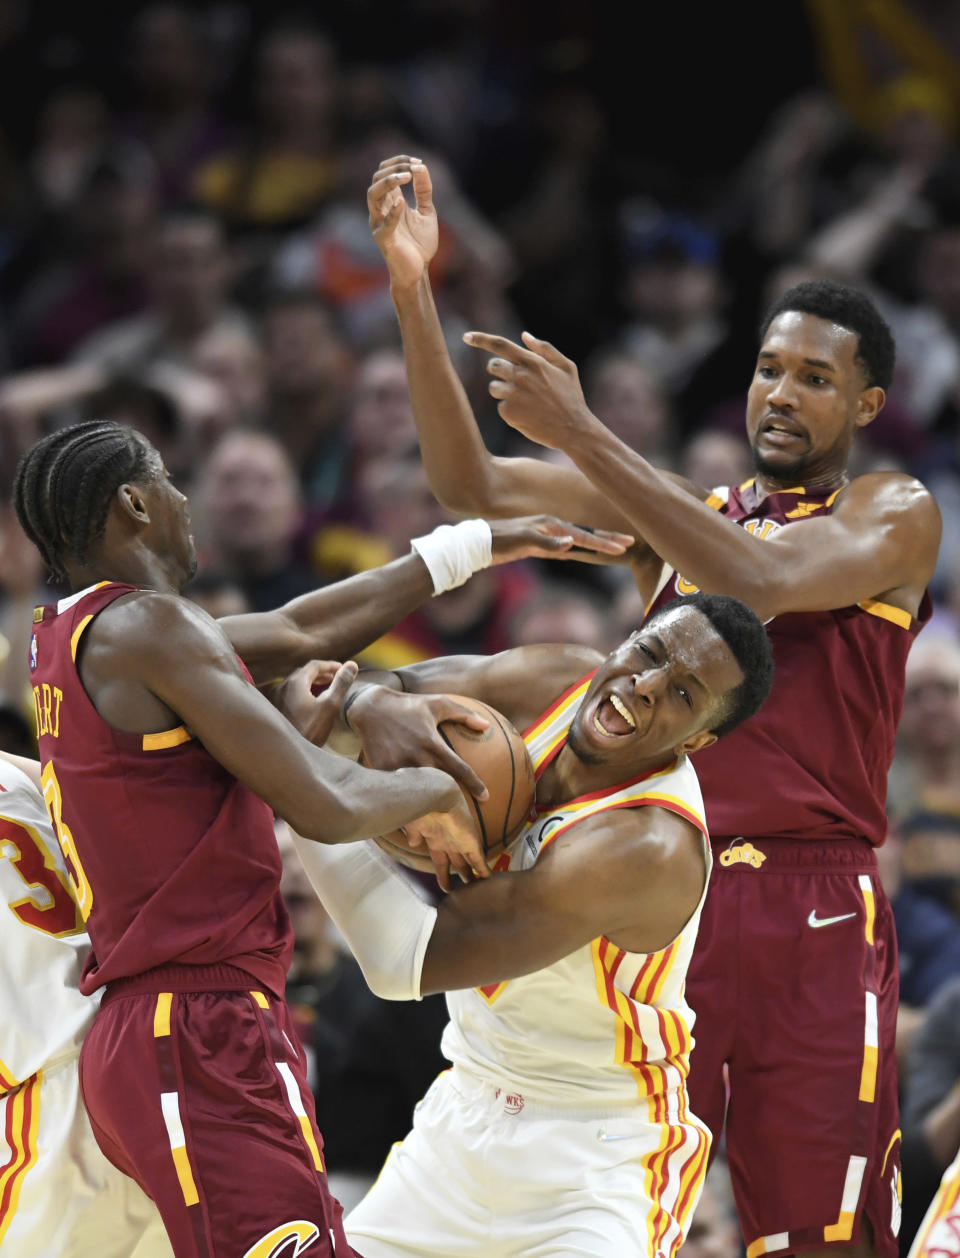 Atlanta Hawks' Onyeka Okongwu pulls in a rebound between Cleveland Cavaliers' Caris LeVert, left, and Evan Mobley during the second half of an NBA play-in basketball game Friday, April 15, 2022, in Cleveland. (AP Photo/Nick Cammett)